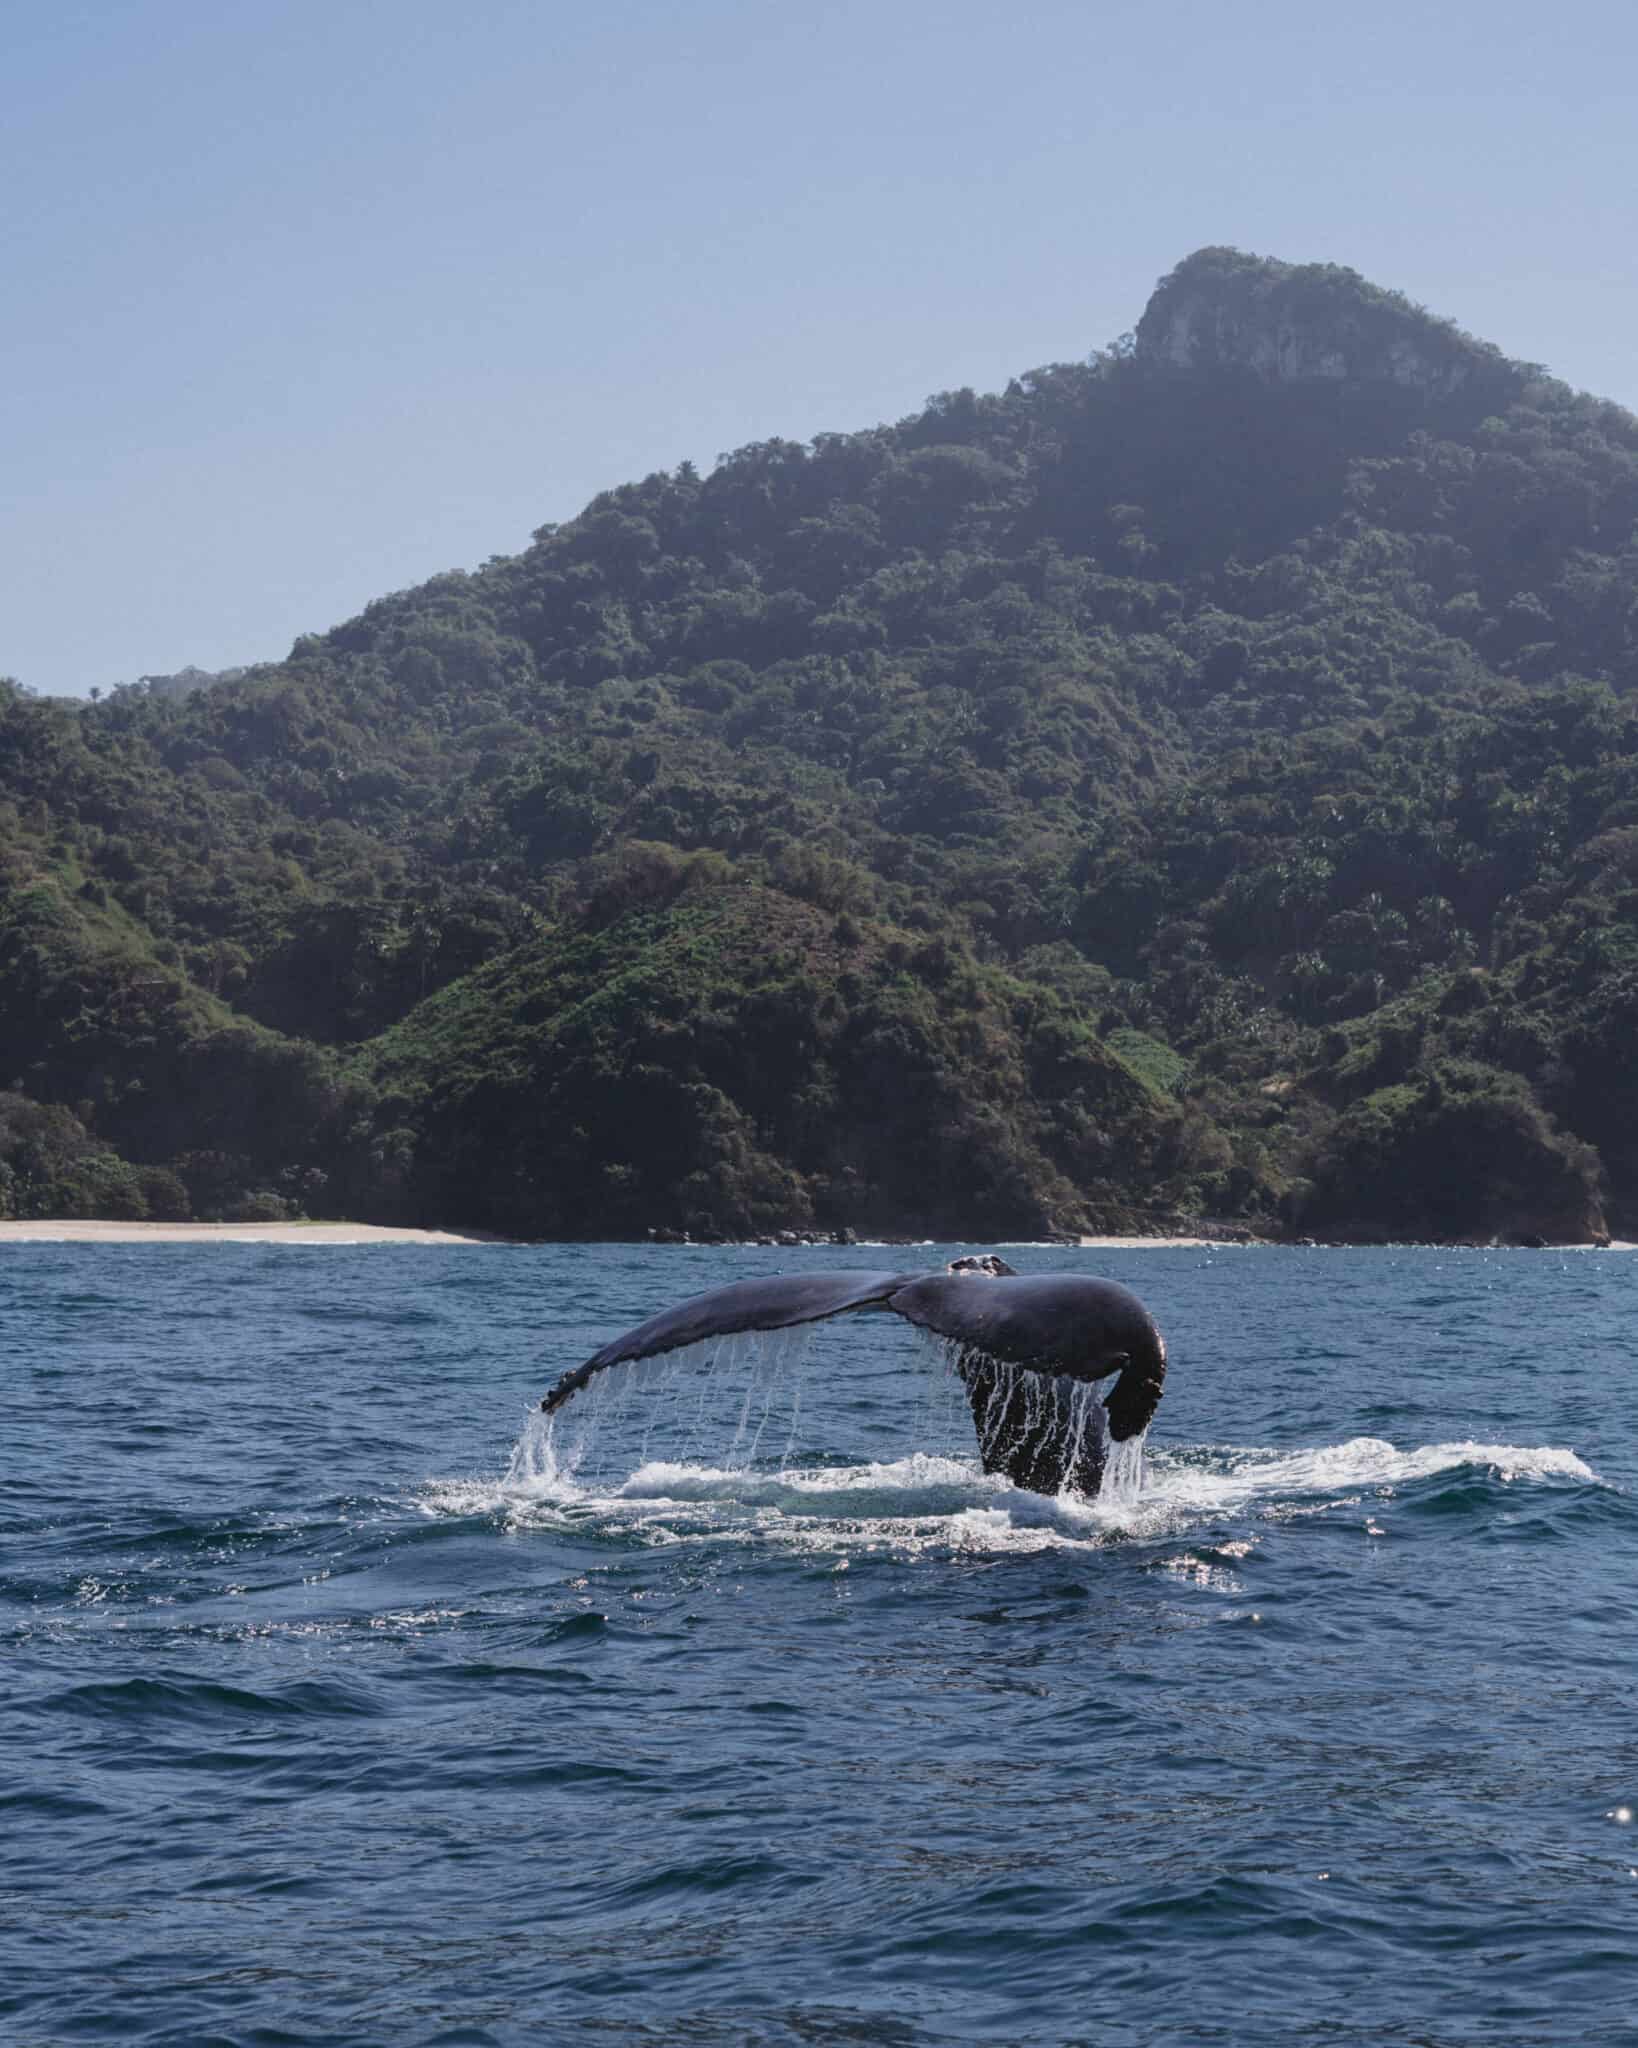 A humpback whale in the ocean off the coast of Sayulita, with mountains in the background.